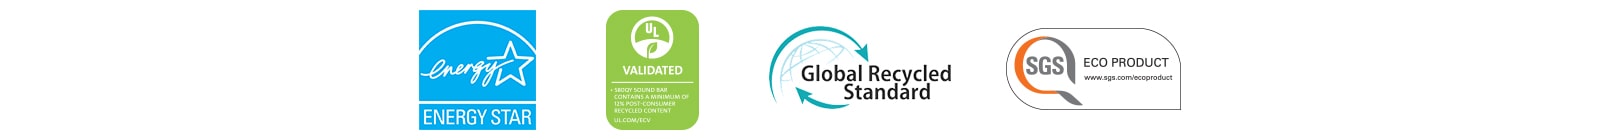 From left ENERGY STAR (logo), UL VALIDATED (logo), Global Recycled Standard (logo), SGS ECO PRODUCT (logo) are shown.